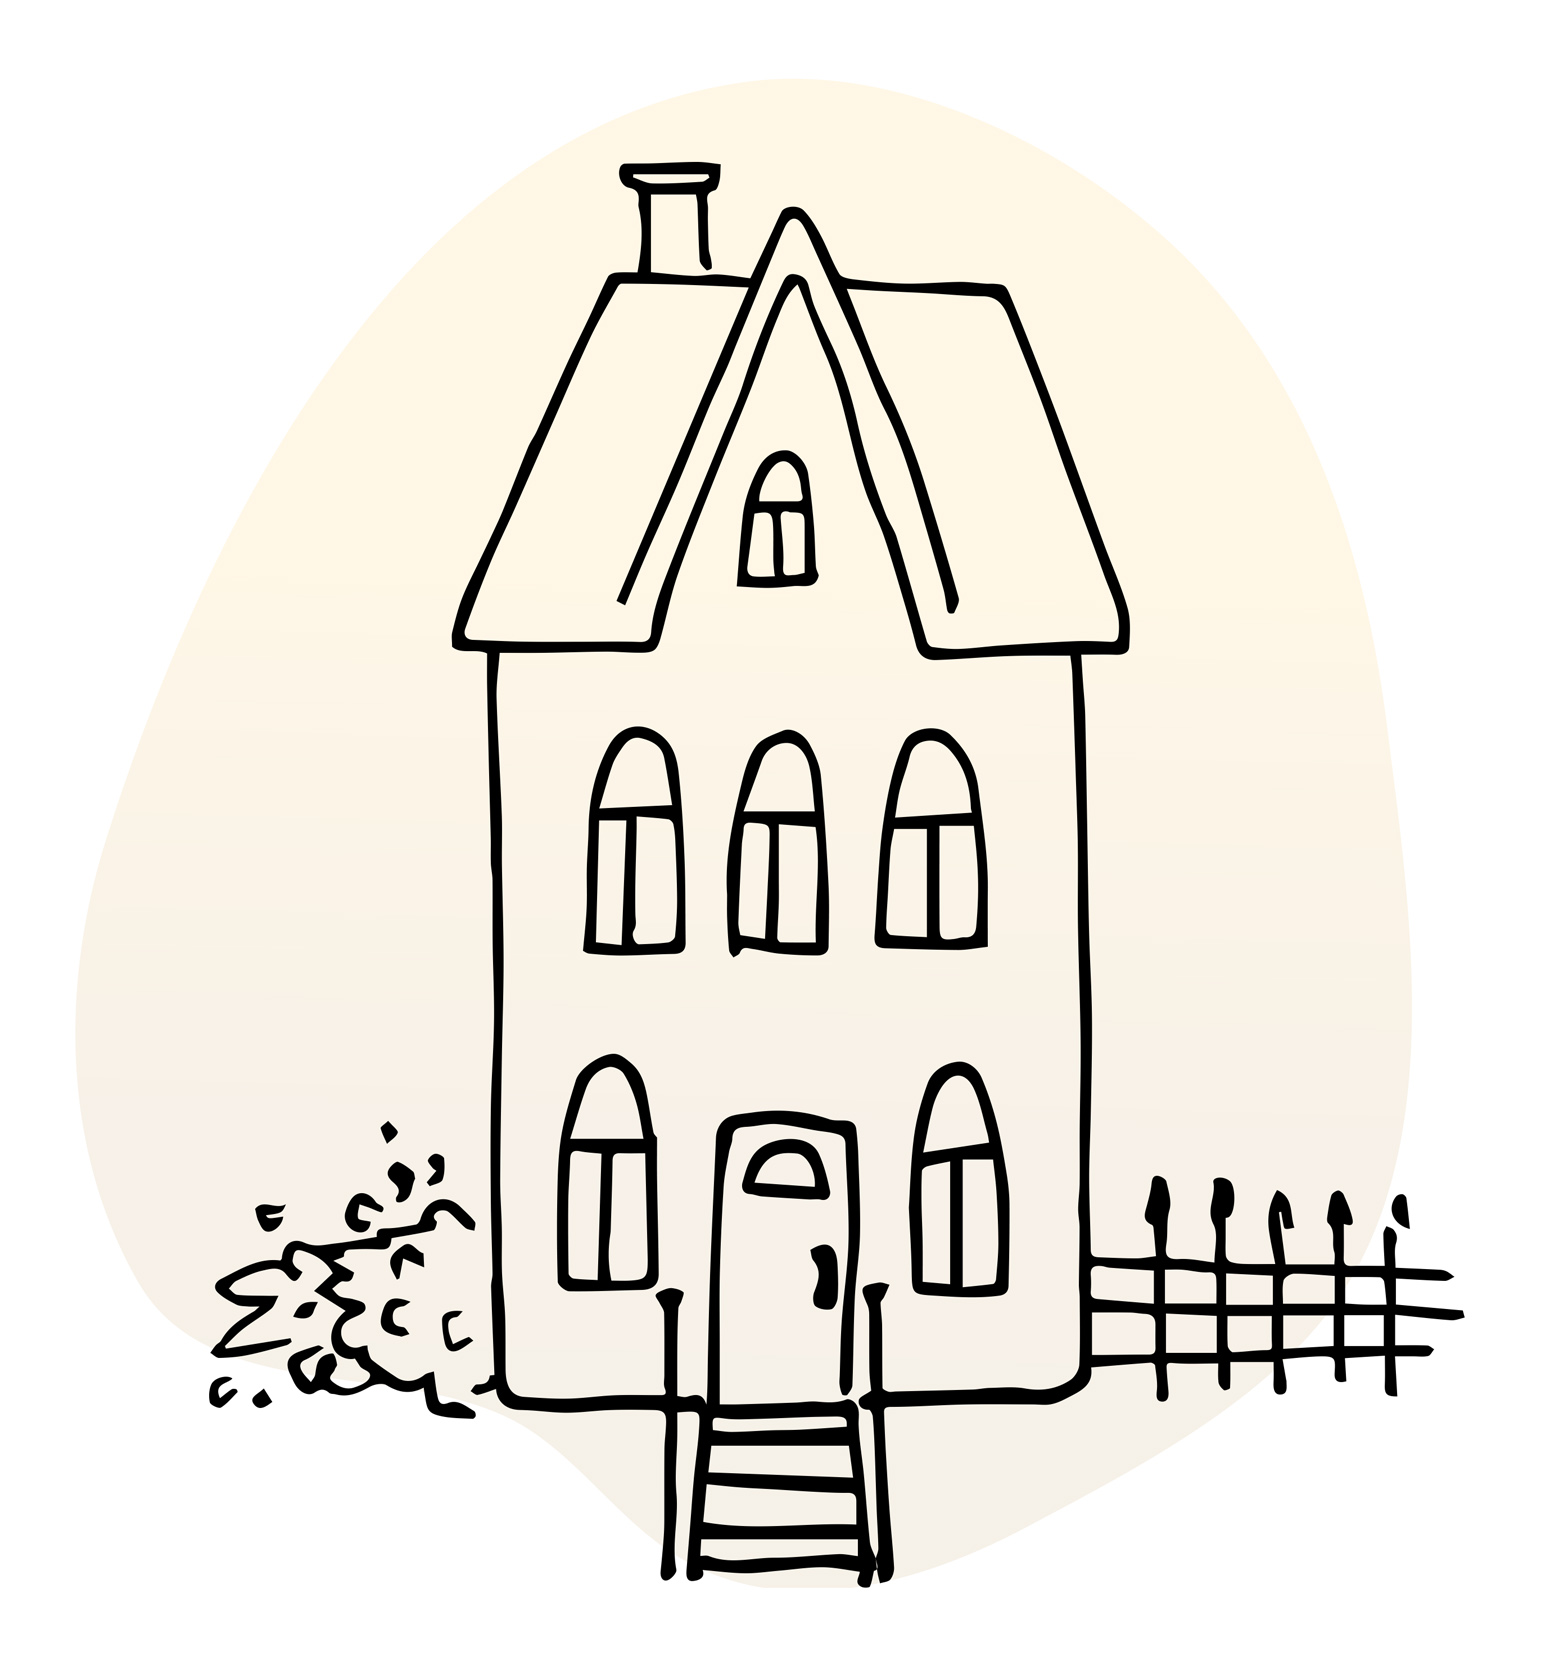 Line illustration of multistory house with cross-gabled roof and chimney, a picket fence on one side, front steps leading to door